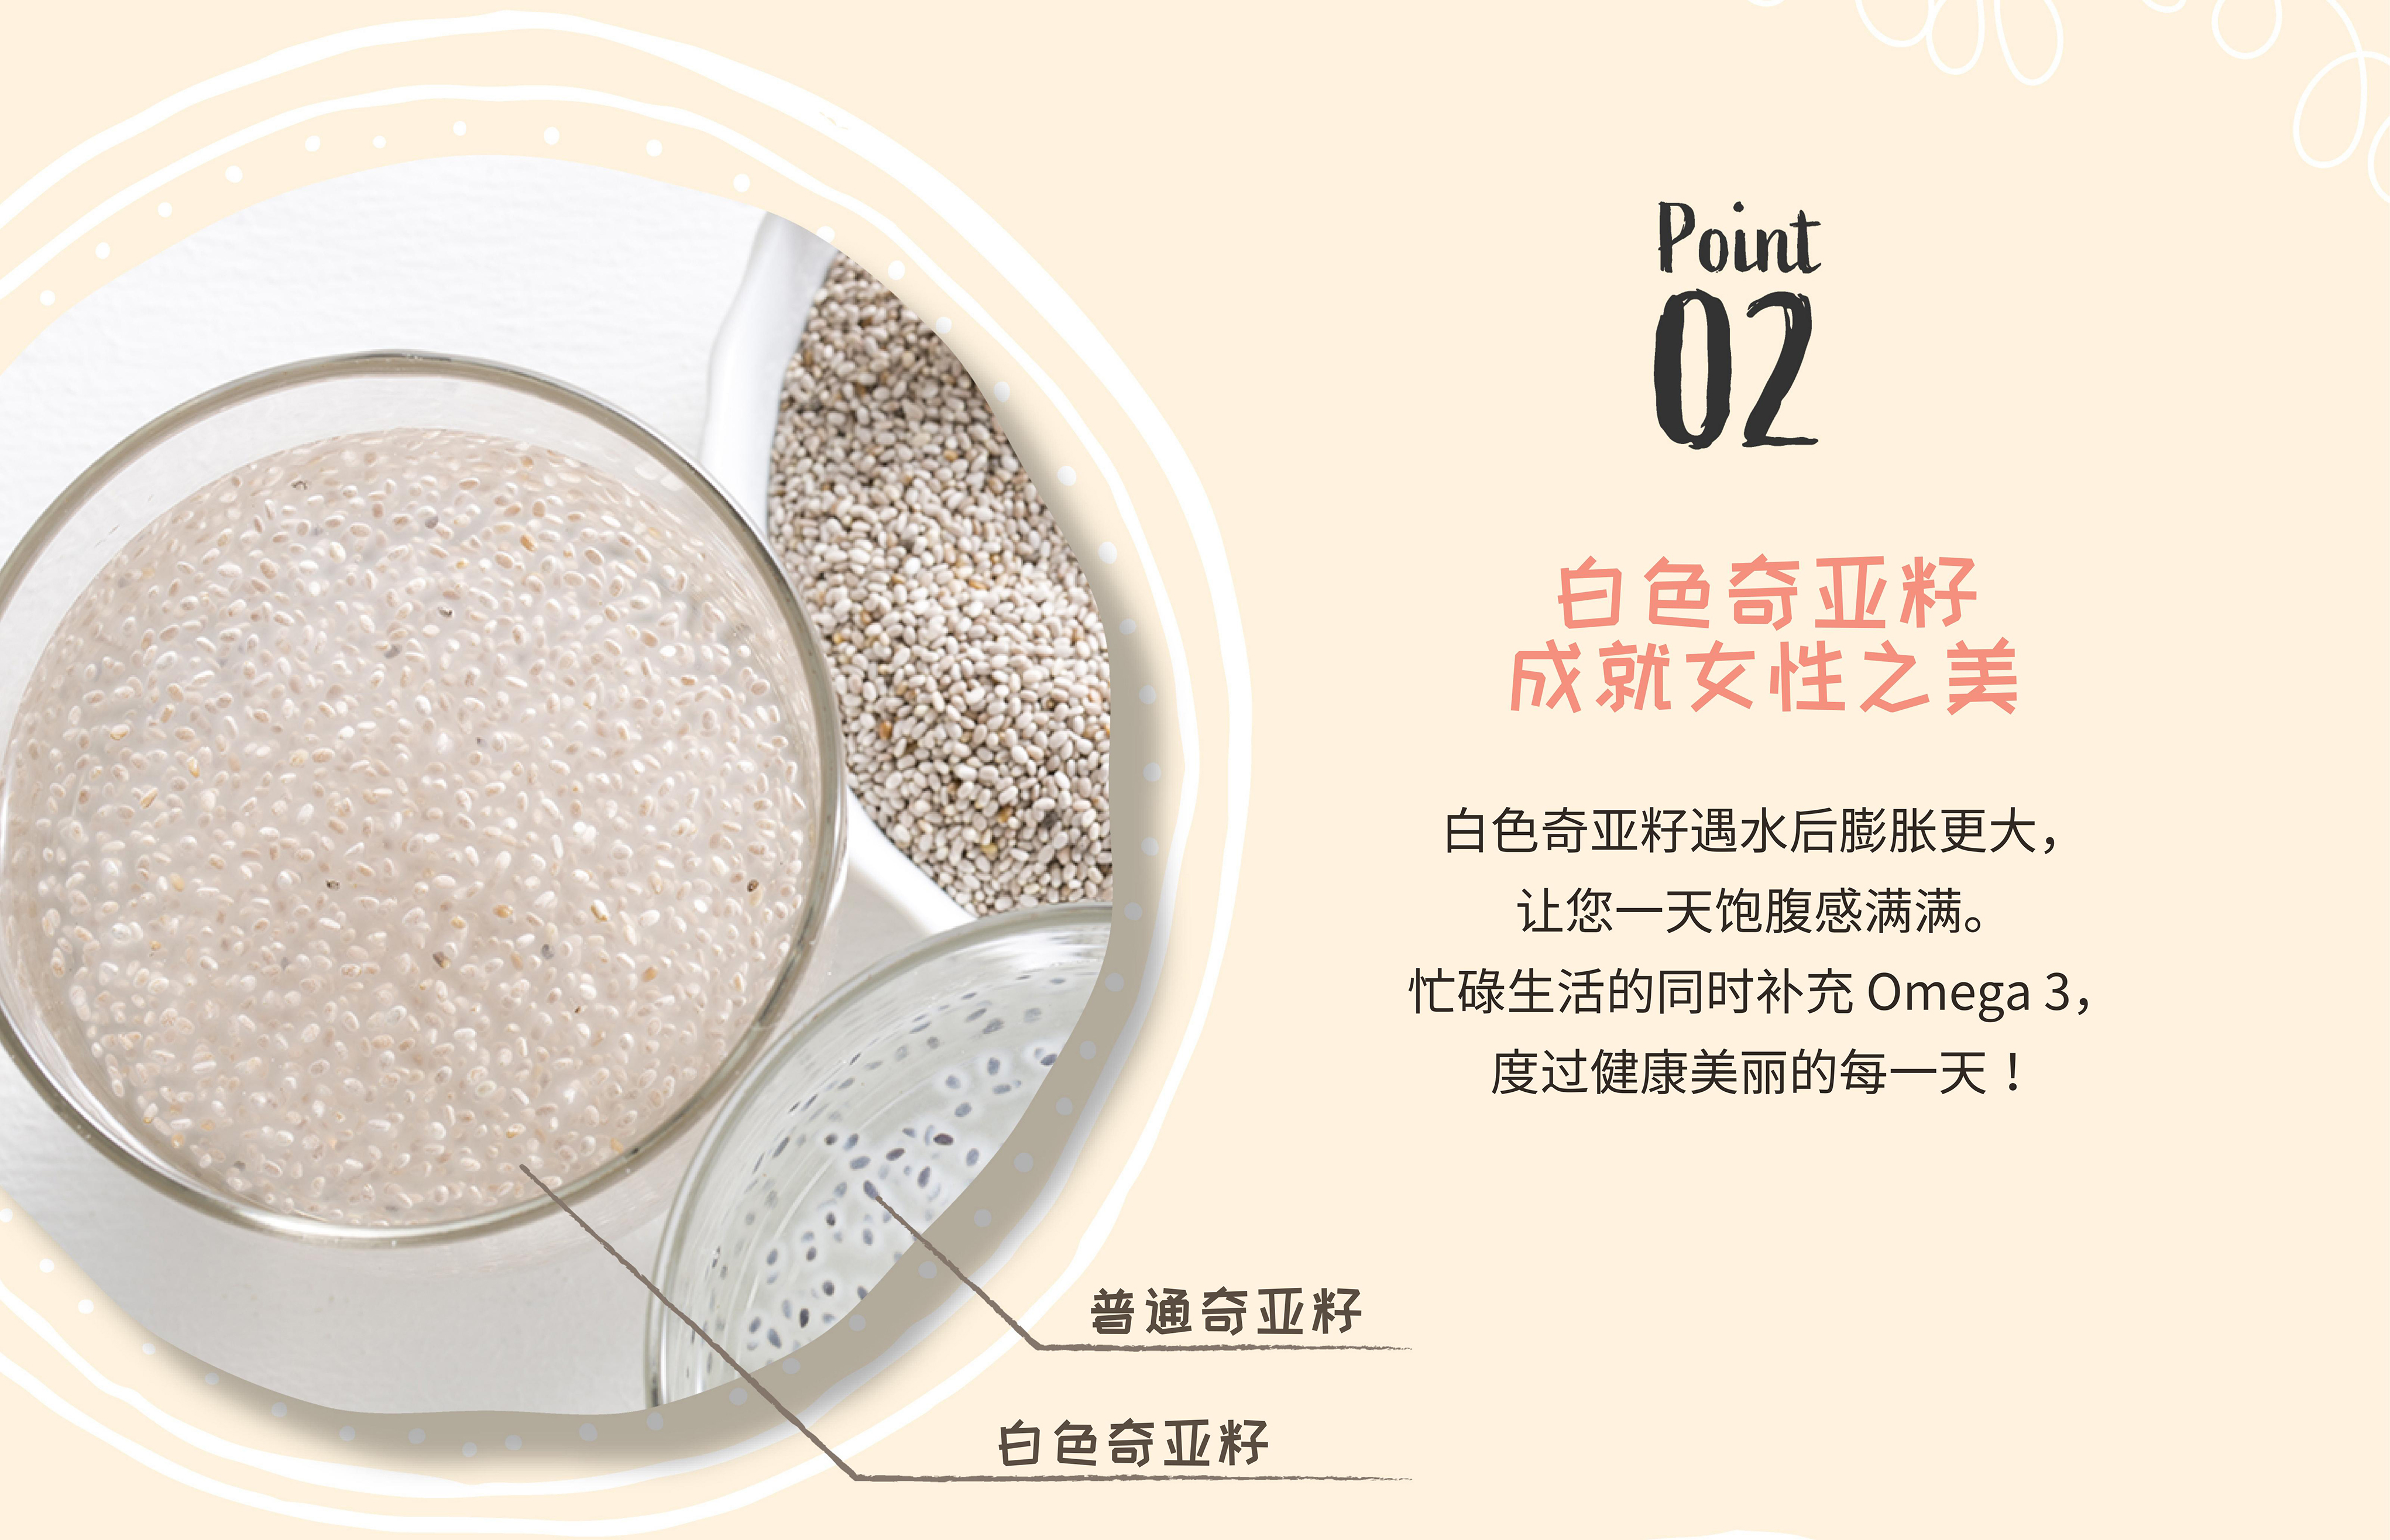 White Chia Seed Beauty Superfood